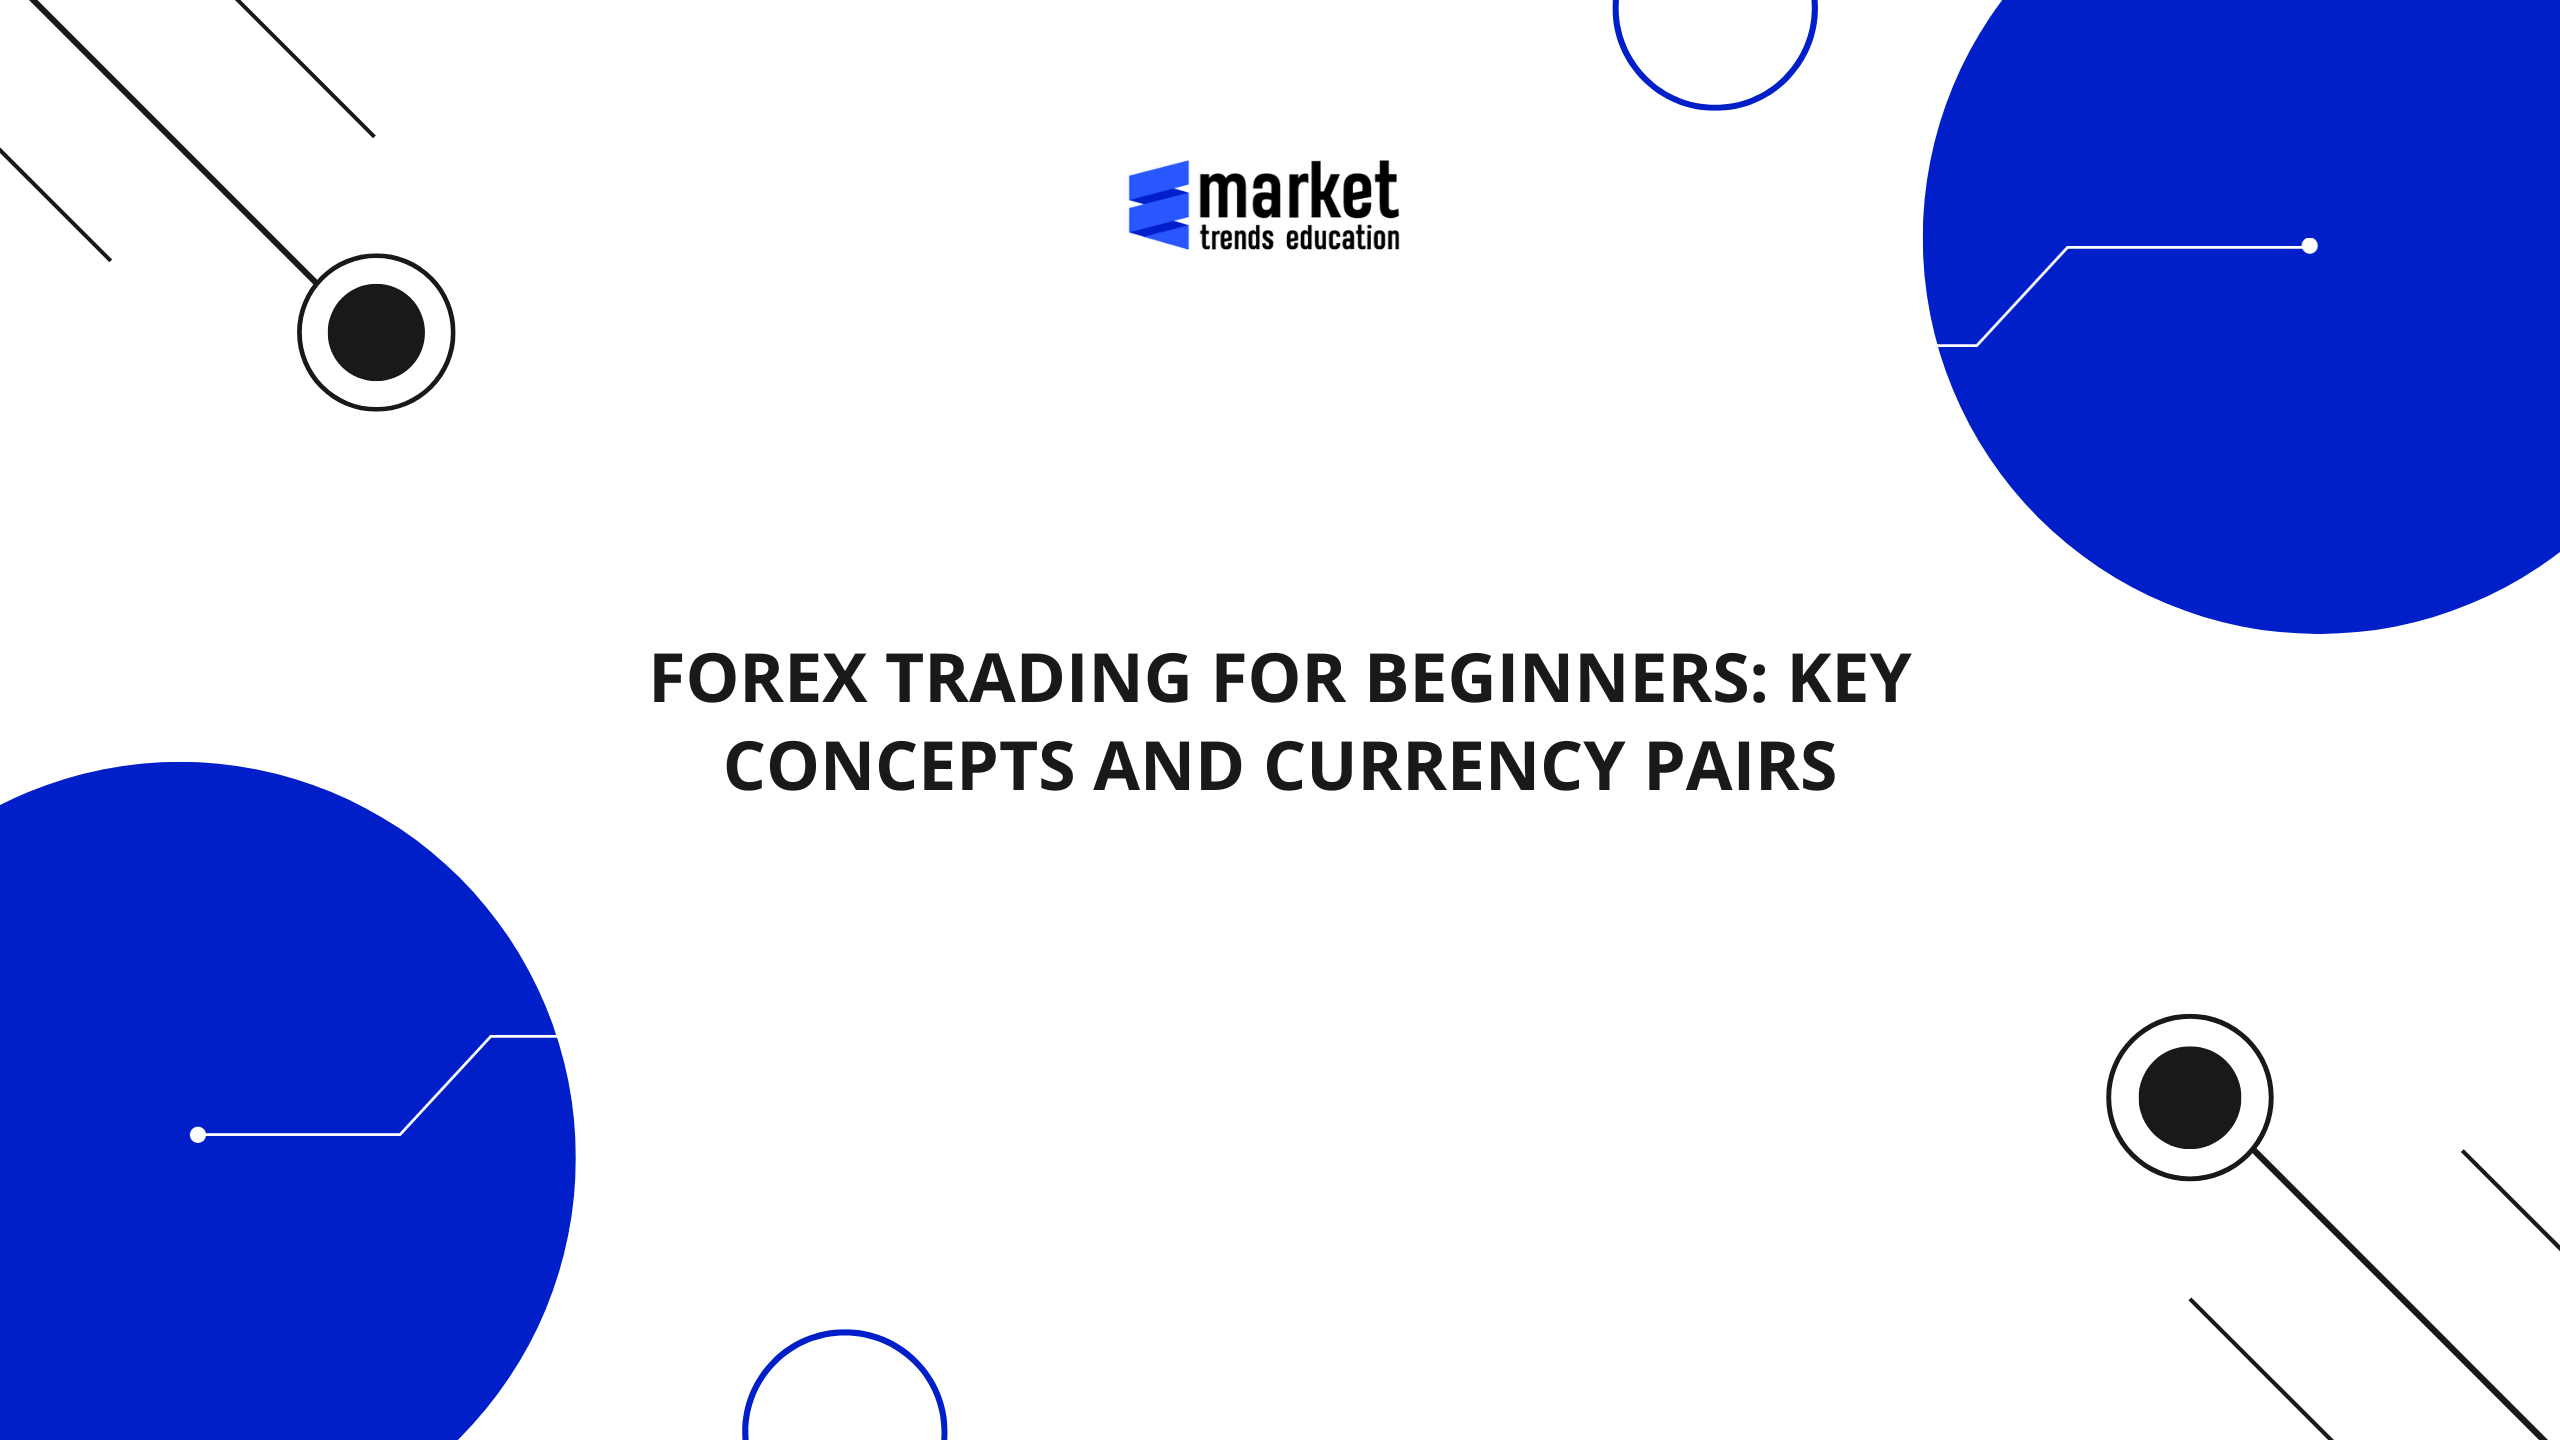 Forex Trading for Beginners: Key Concepts and Currency Pairs